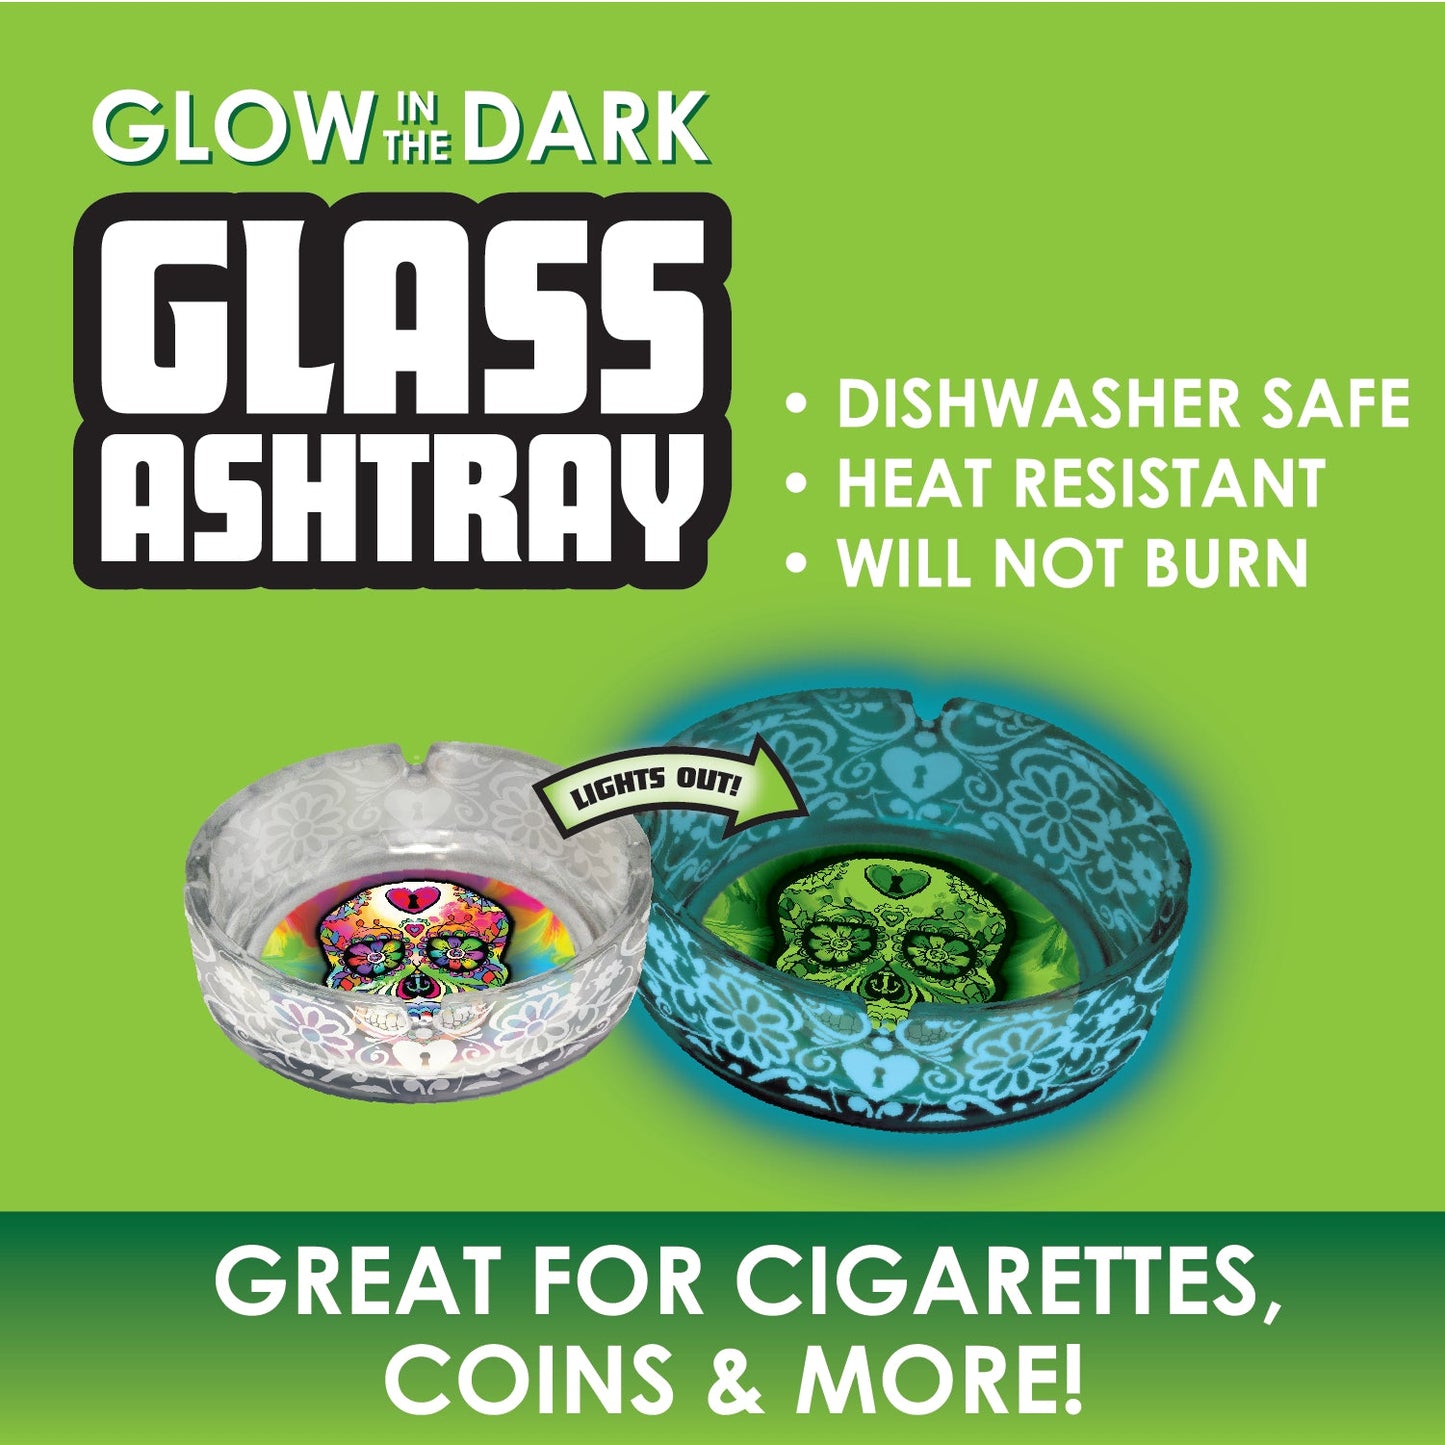 ITEM NUMBER 041494 GID GLASS ASHTRAY 5 PIECES PER DISPLAY